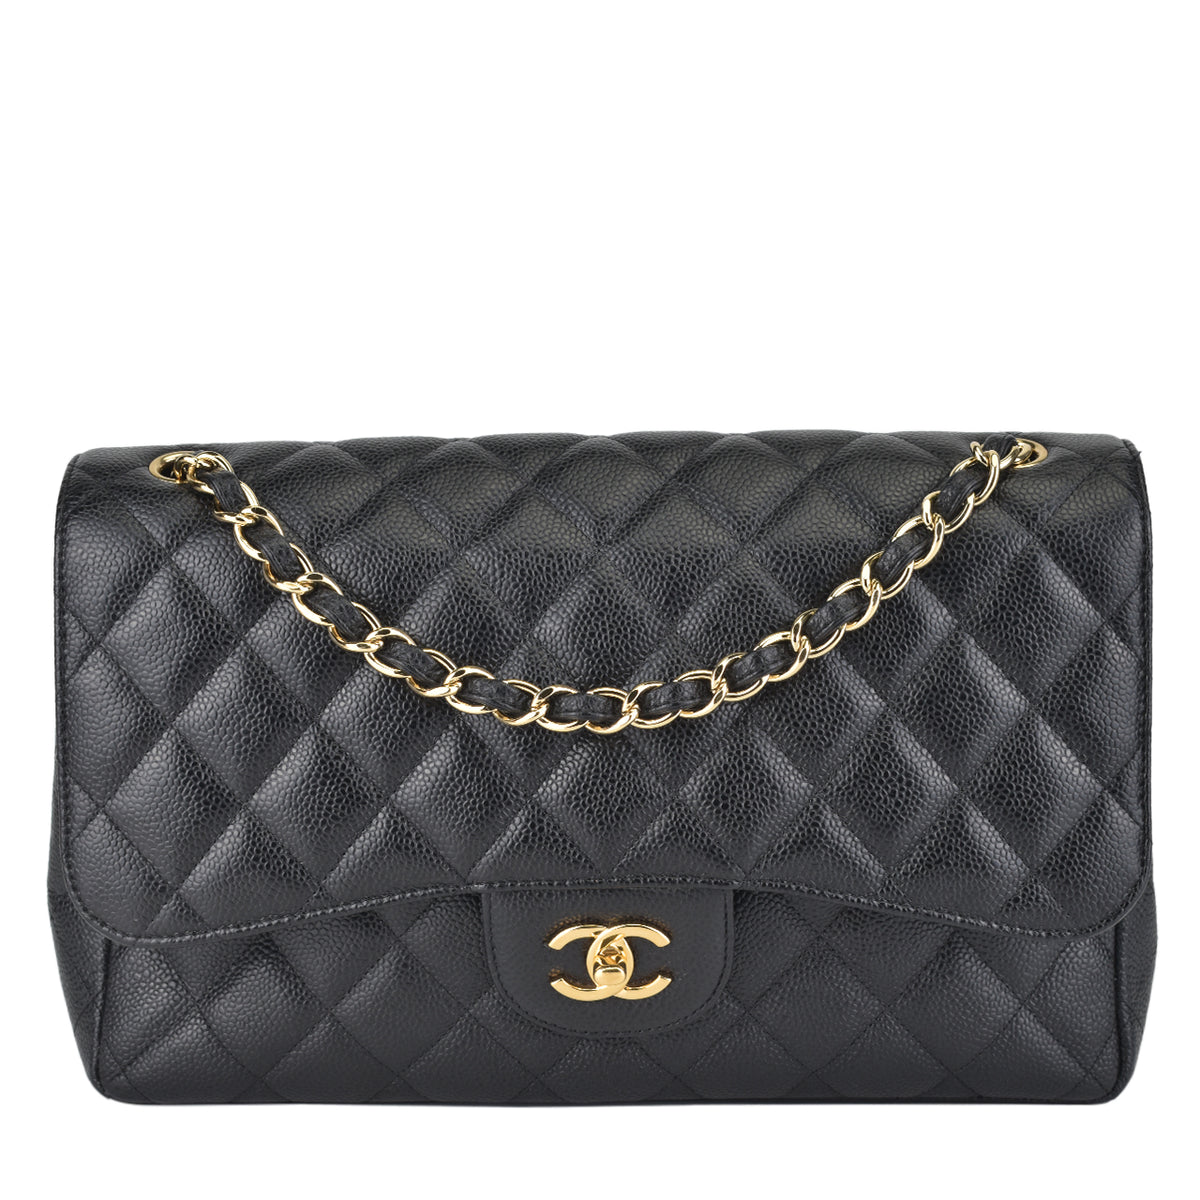 Chanel - Glampot  Authentic Preloved and Brand New Bags and